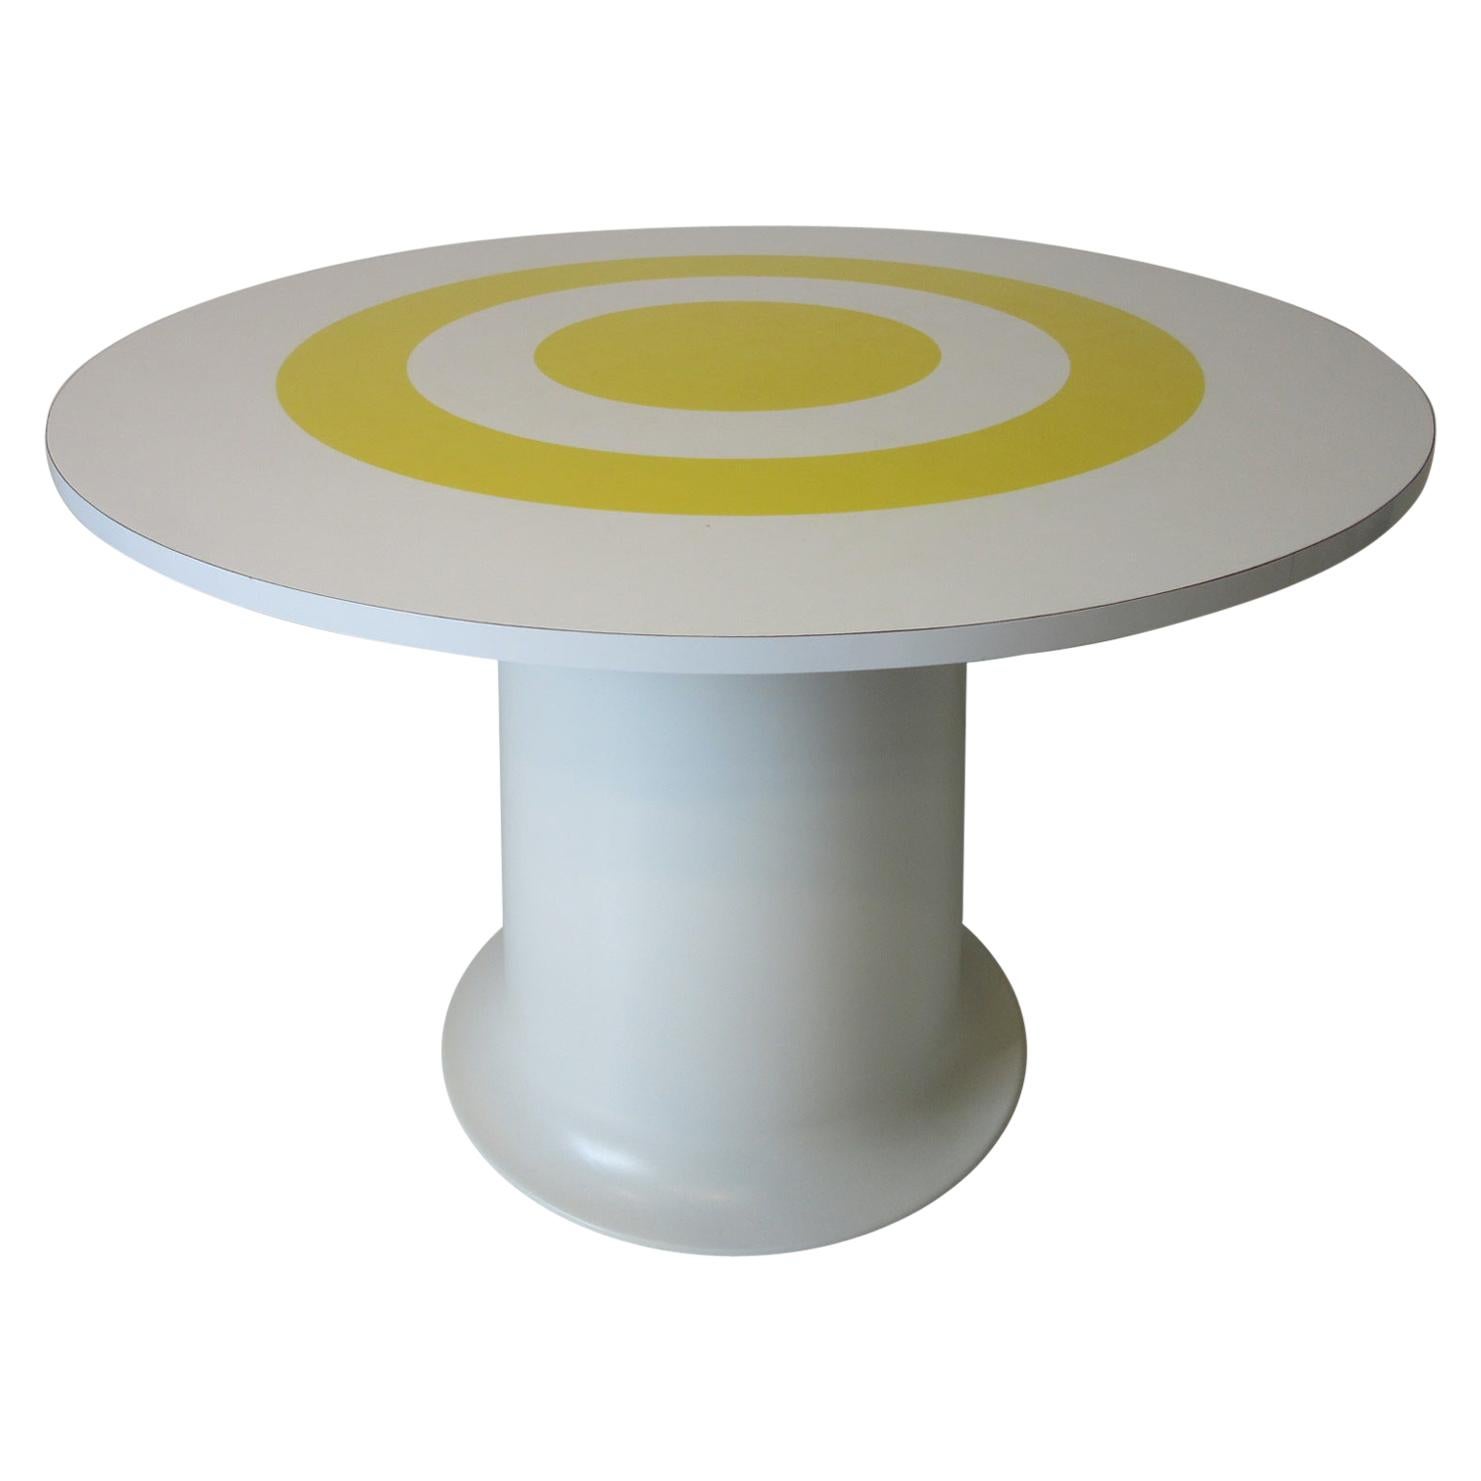 1970s Space Age Op Art Dining Table in the style of Verner Panton